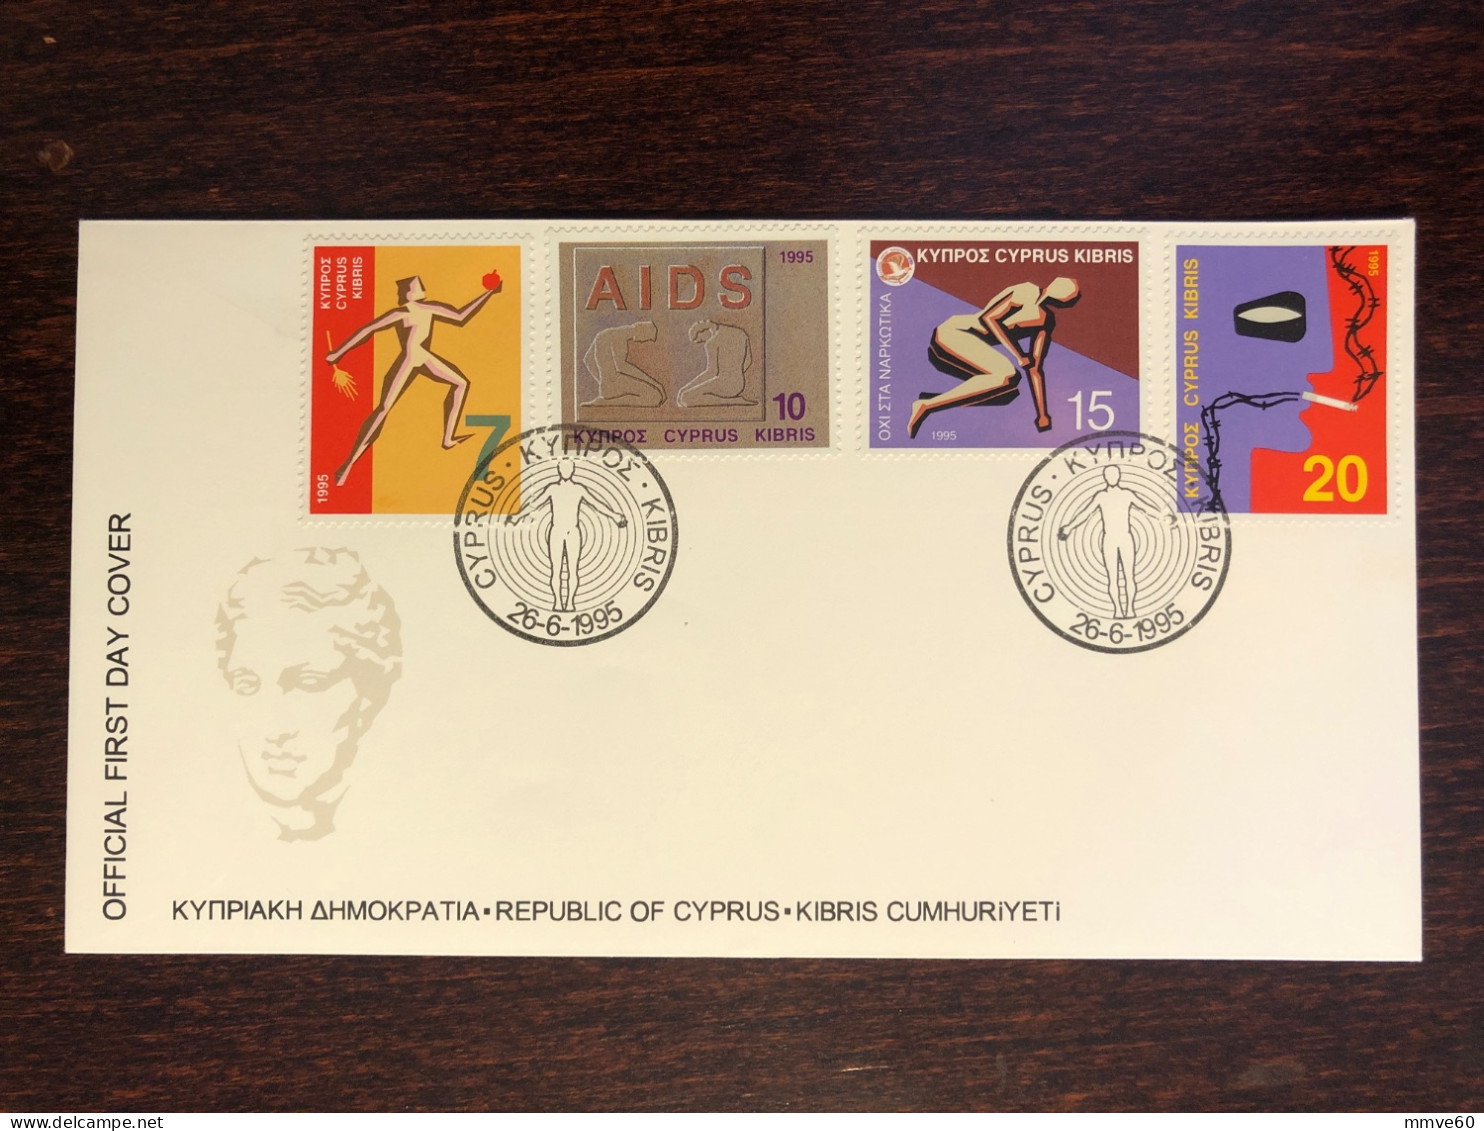 CYPRUS FDC COVER 1995 YEAR AIDS SIDA HEALTH MEDICINE STAMPS - Storia Postale